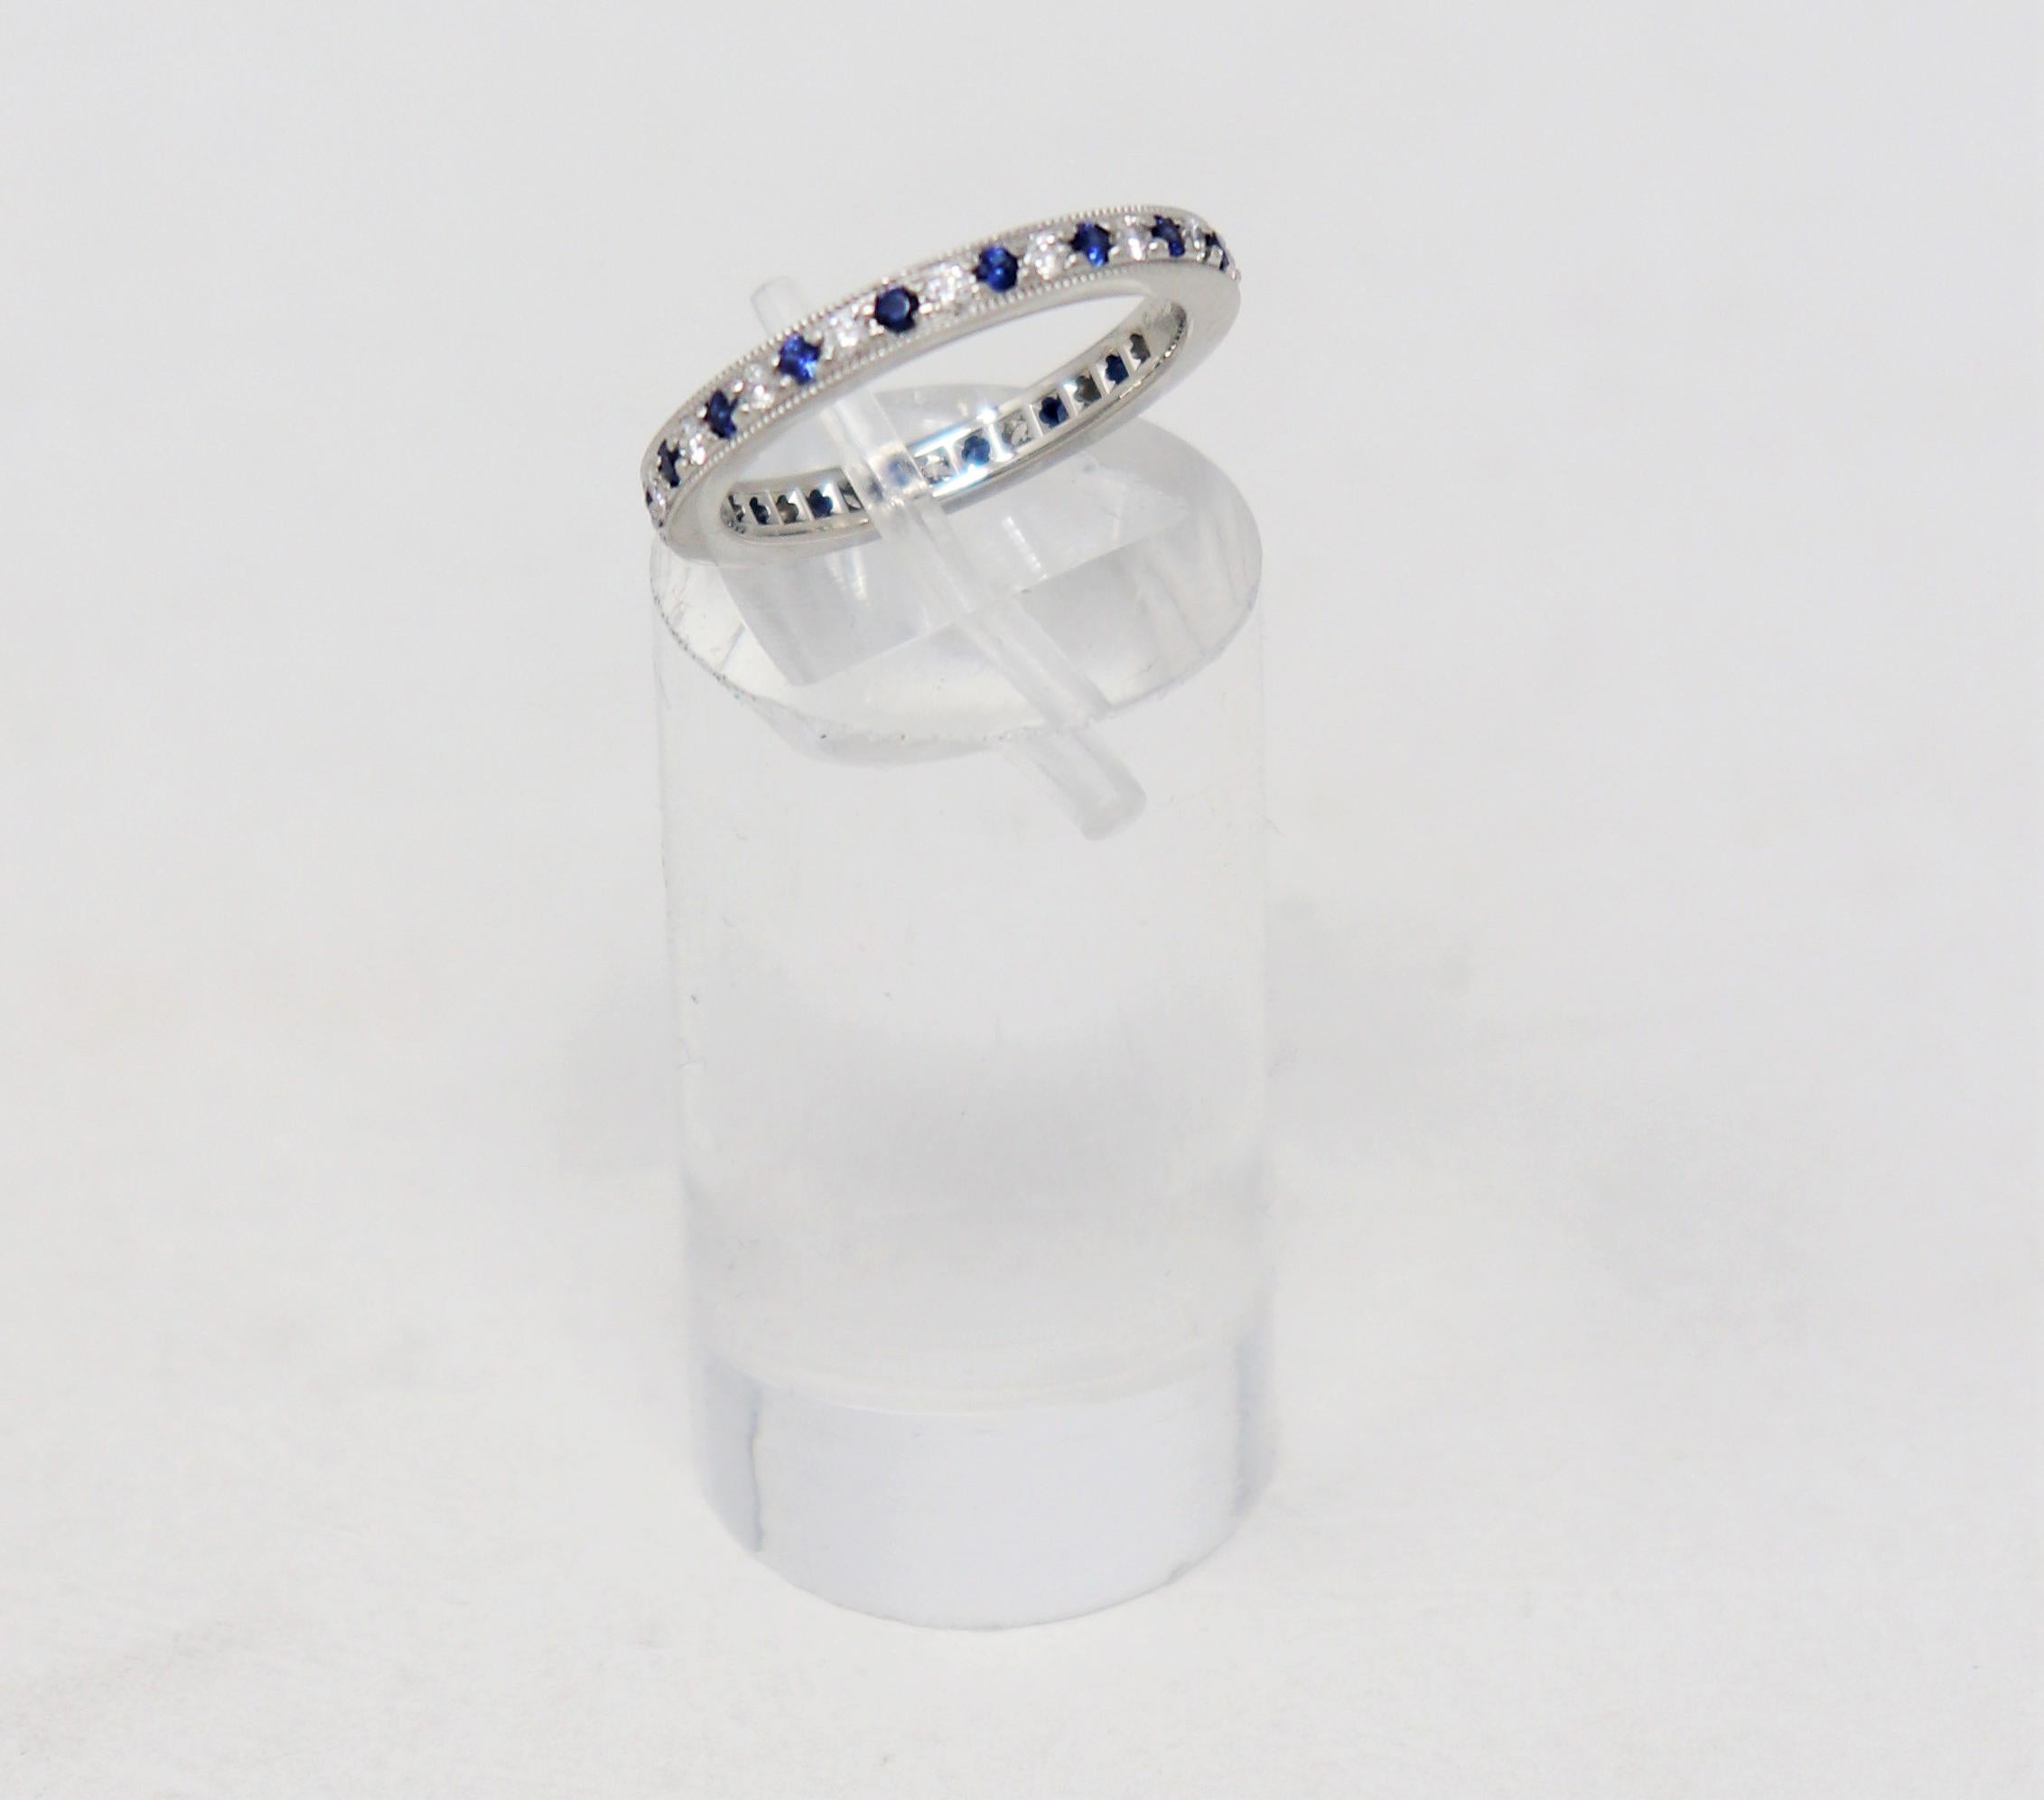 Ring size: 4.25

Stunning Tiffany & Co. Legacy Collection sapphire and diamond eternity band ring. This timeless beauty features bright blue sapphires and icy white diamonds bead set in an alternating pattern throughout the piece. The thin, milgrain